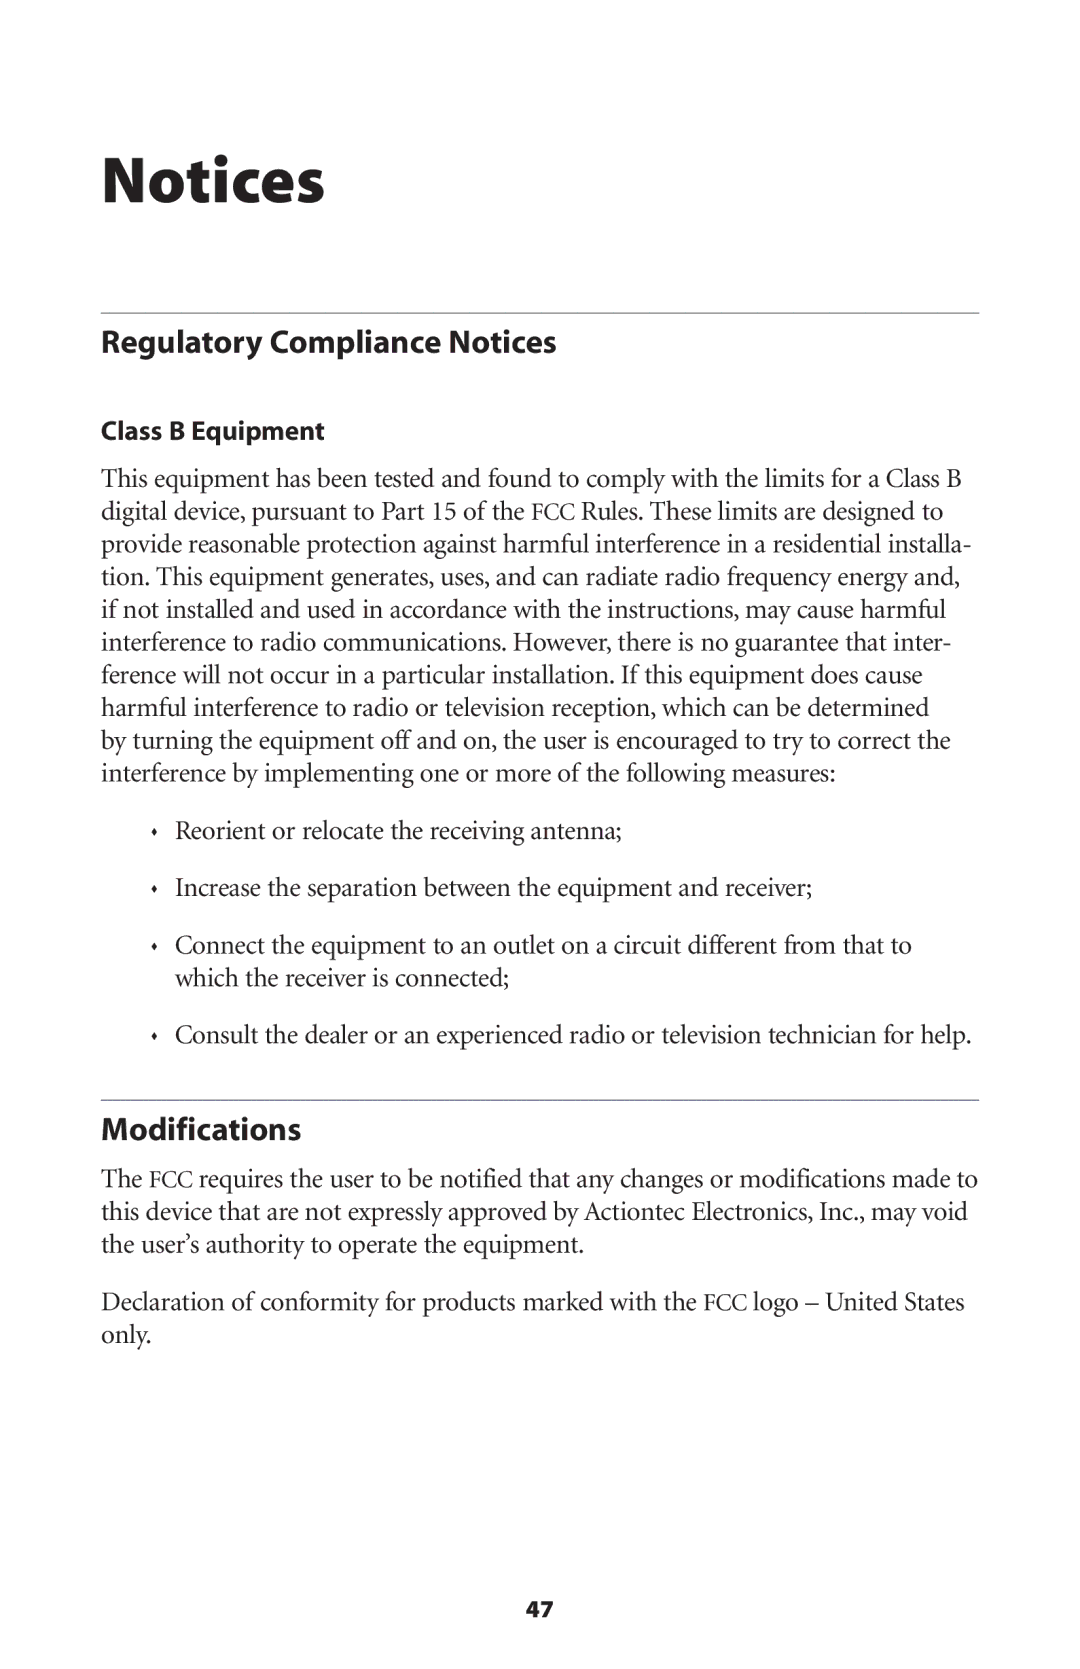 Actiontec electronic HPE100T user manual Regulatory Compliance Notices, Modifications 